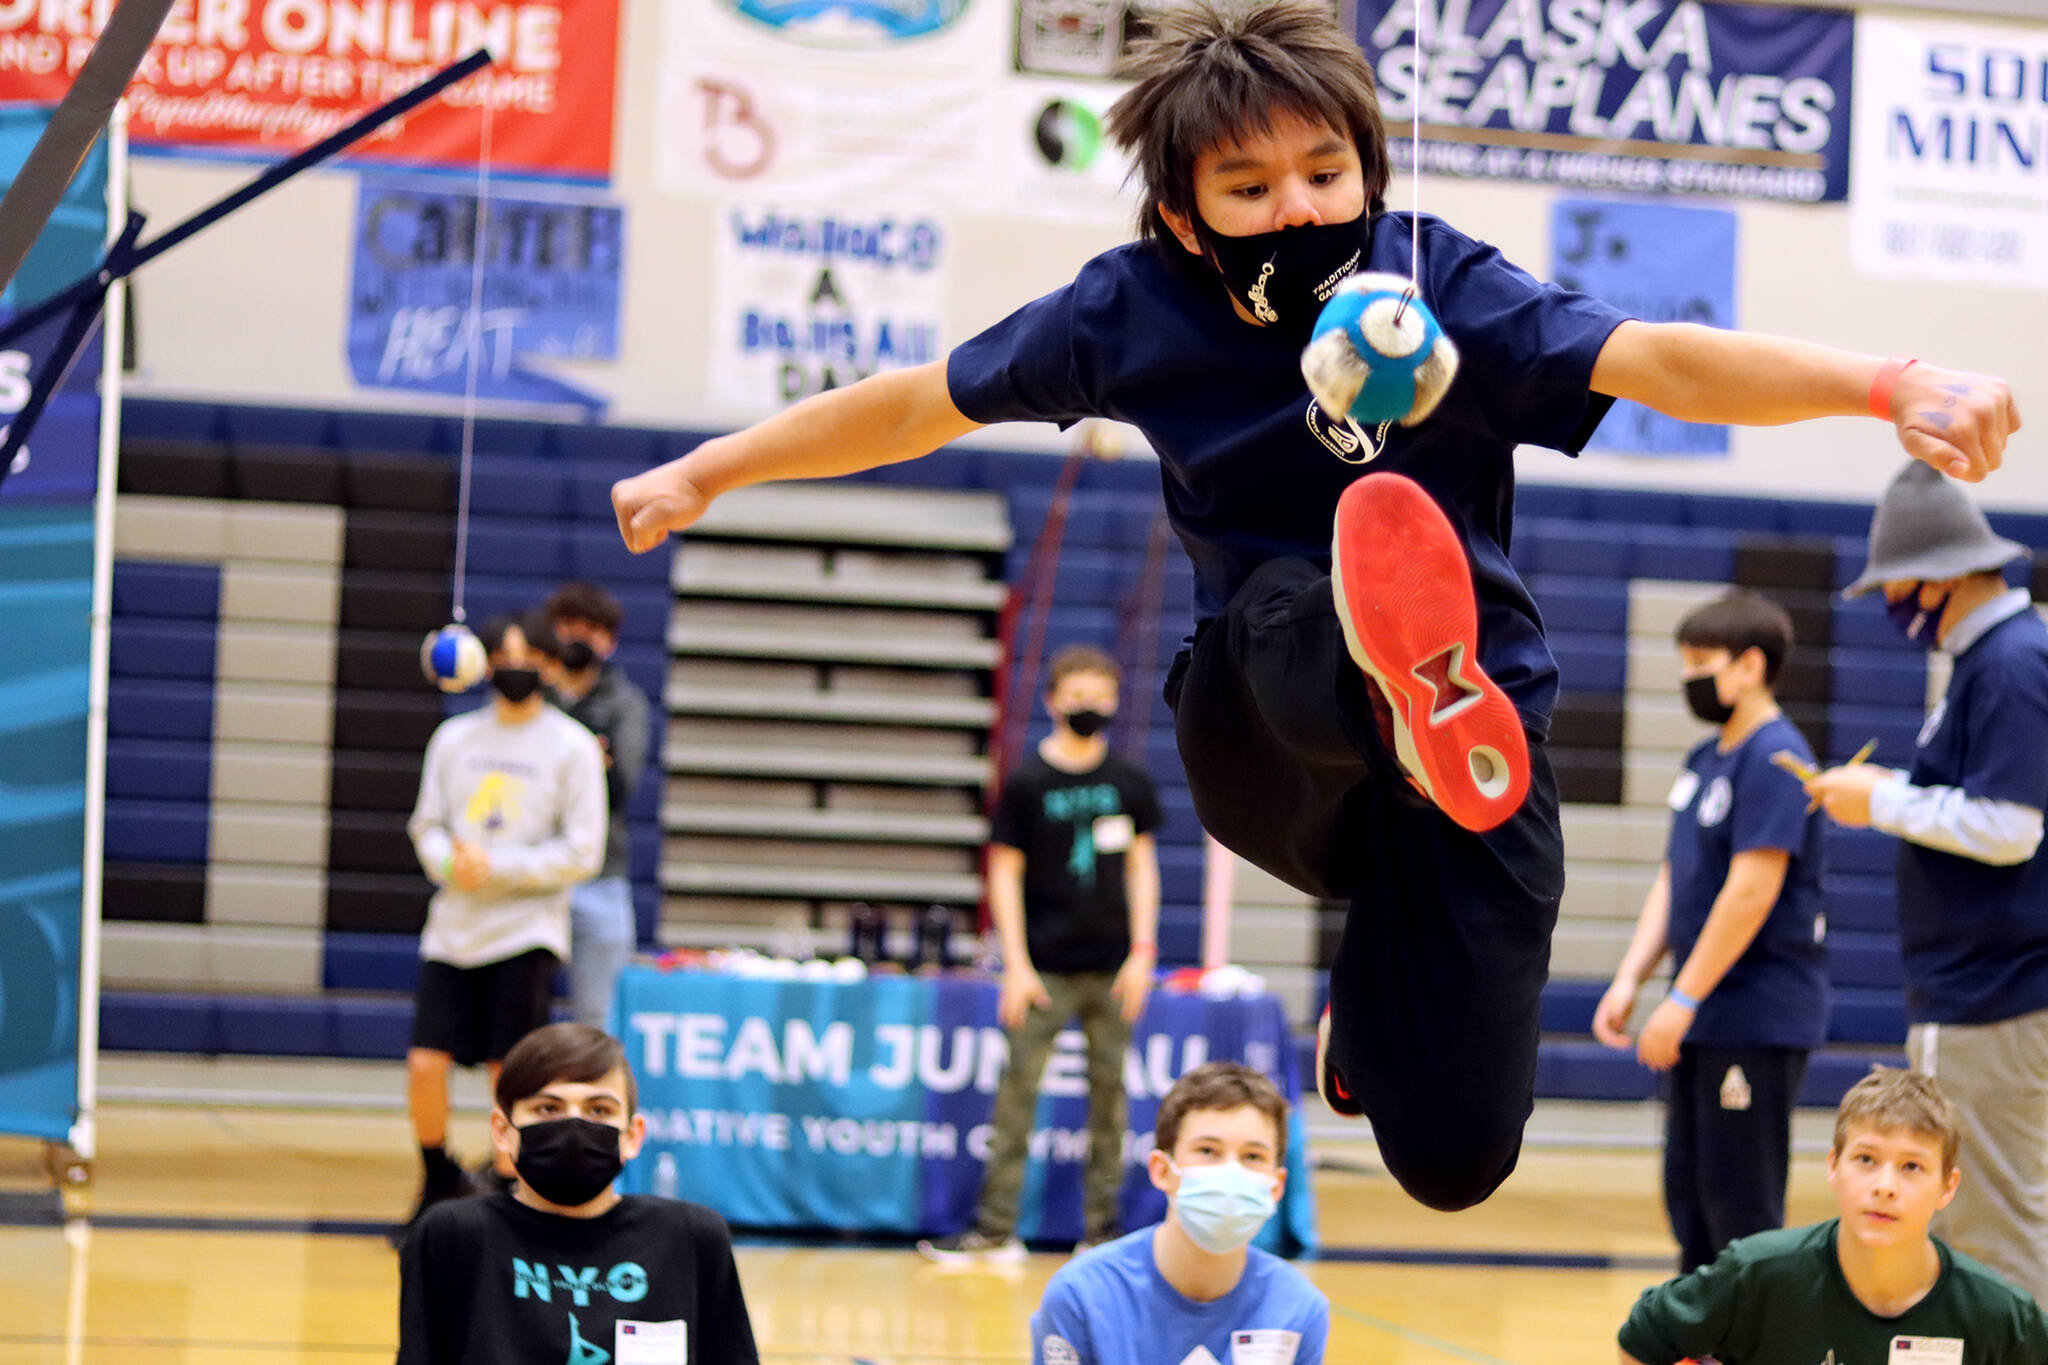 Donovan Jackson, 12, of Juneau competes in the one-foot high kick Saturday morning during the 2022 Traditional Games. The games were held at Thunder Mountain High School. (Ben Hohenstatt / Juneau Empire)